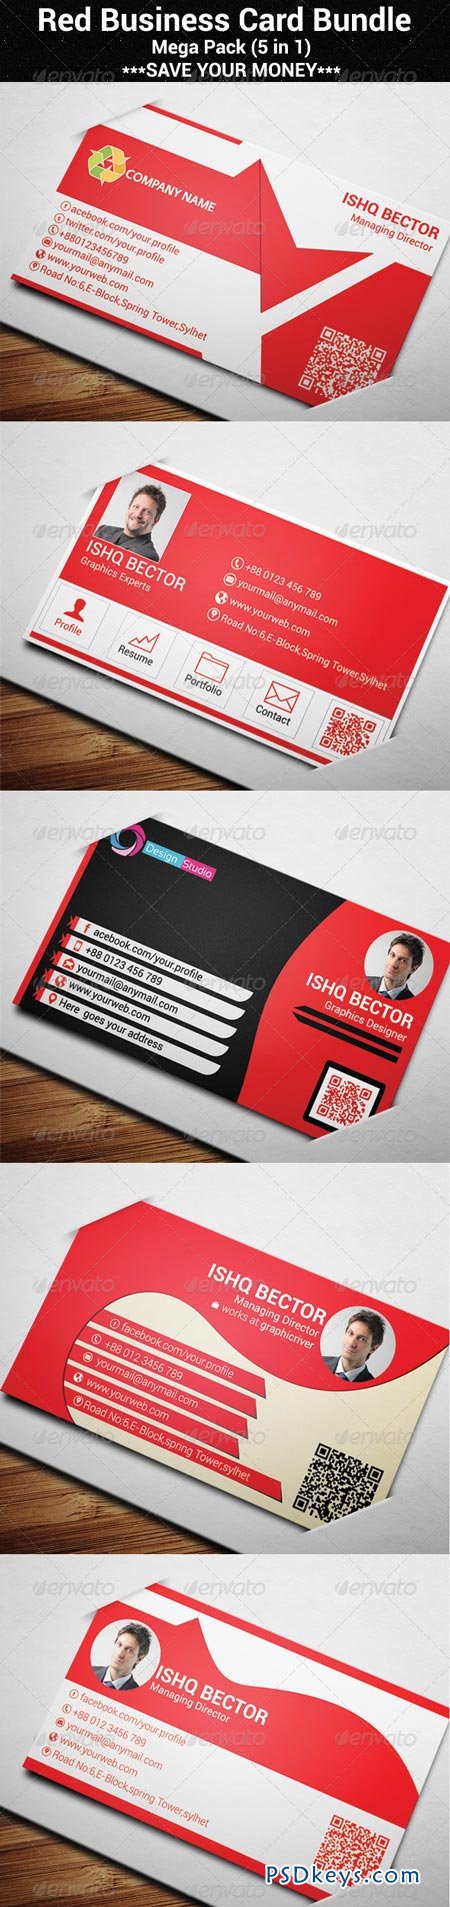 5 in 1 Red Business Card Bundle 6925926